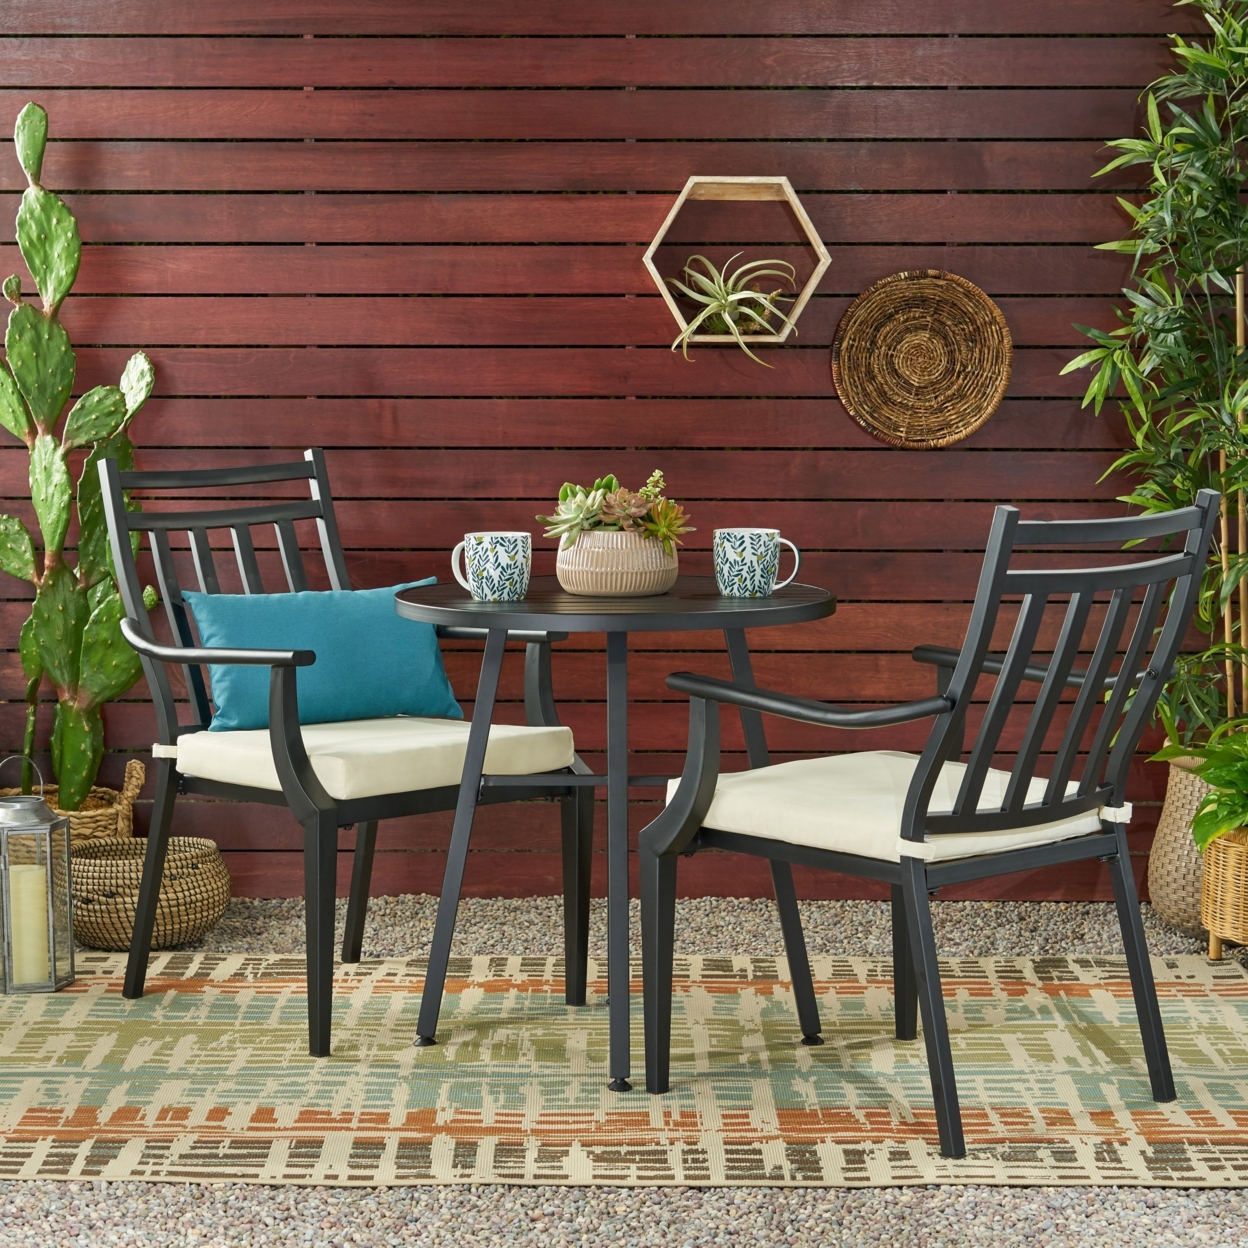 Olive Outdoor 3 Piece Bistro Set With Cushions - Beige